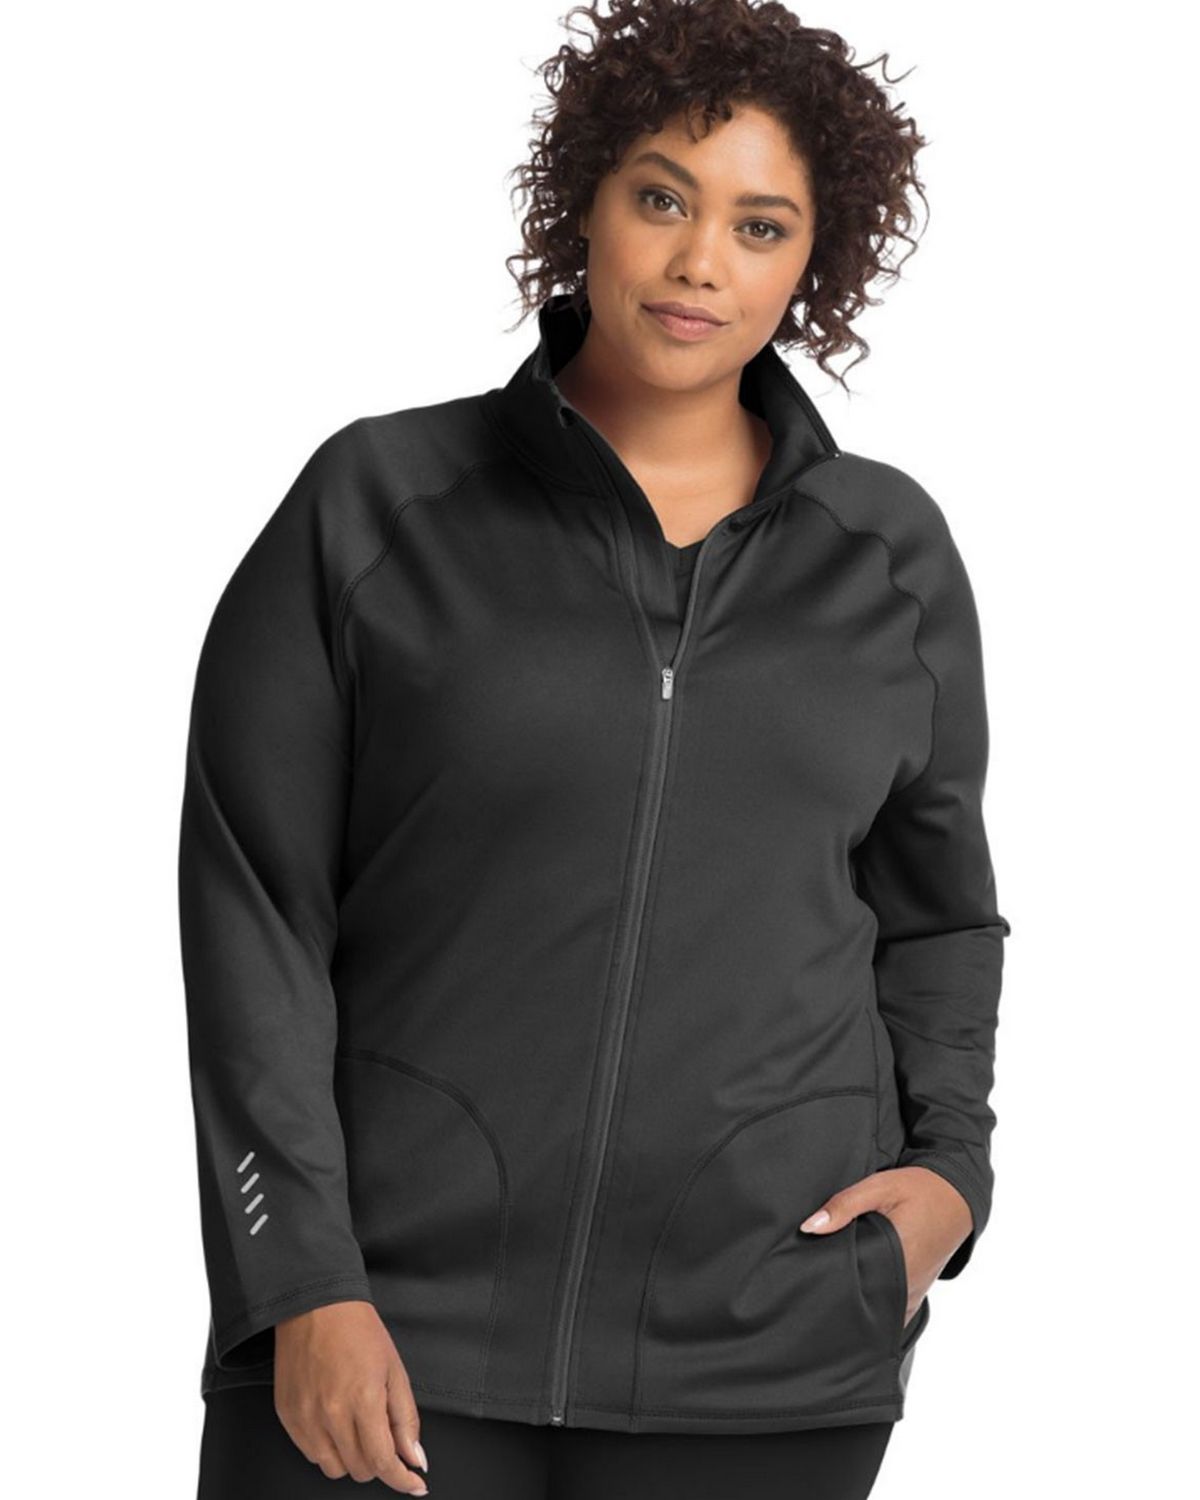 5X 0J906 Just My Size Active Full Zip Jacket Size 1X